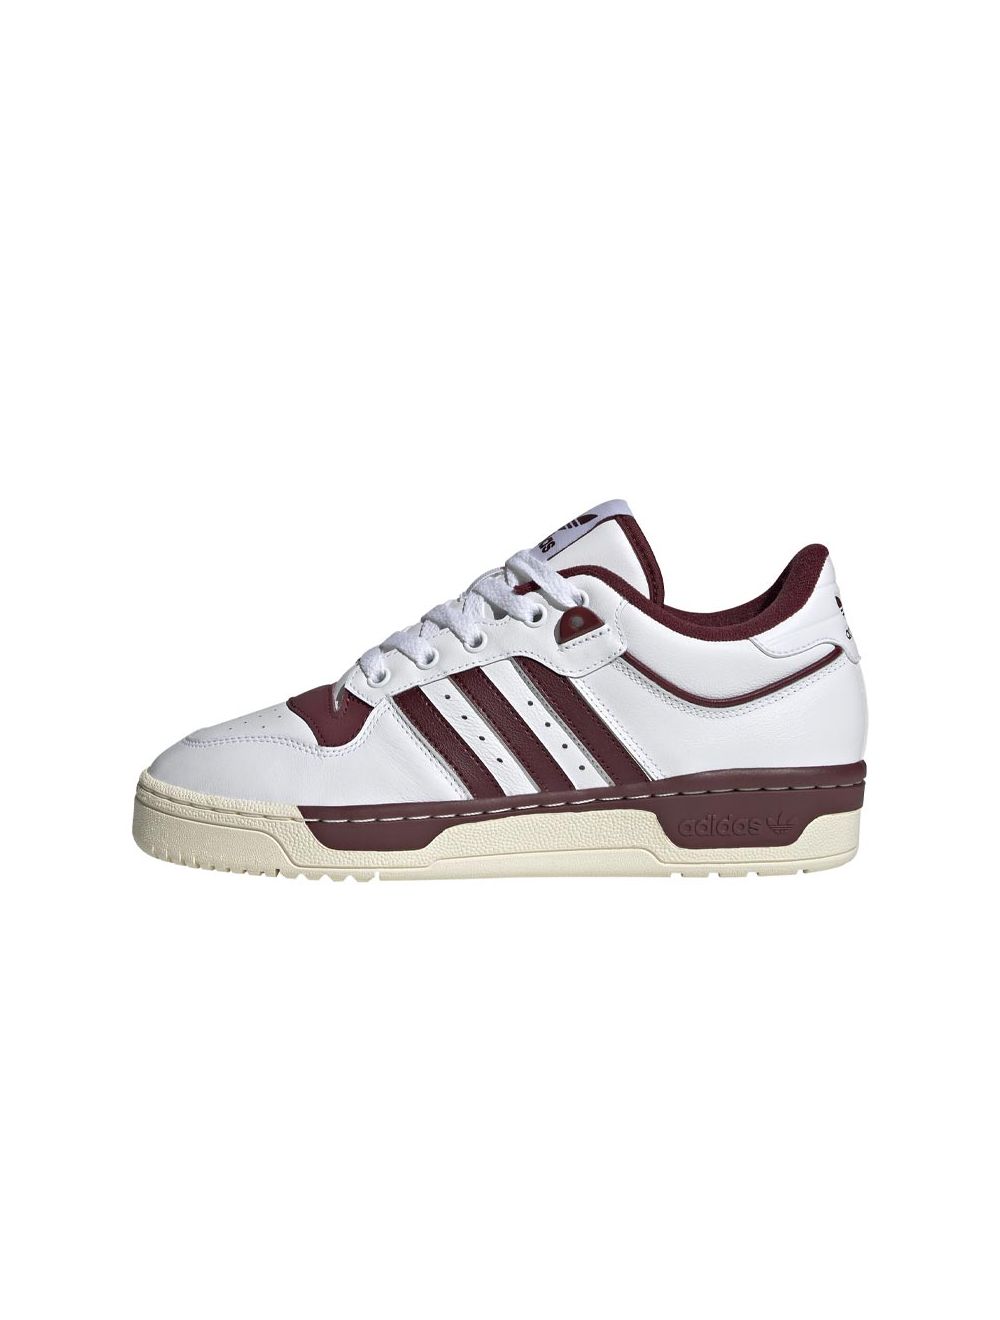 adidas Originals Rivalry Low 86 Womens White Red